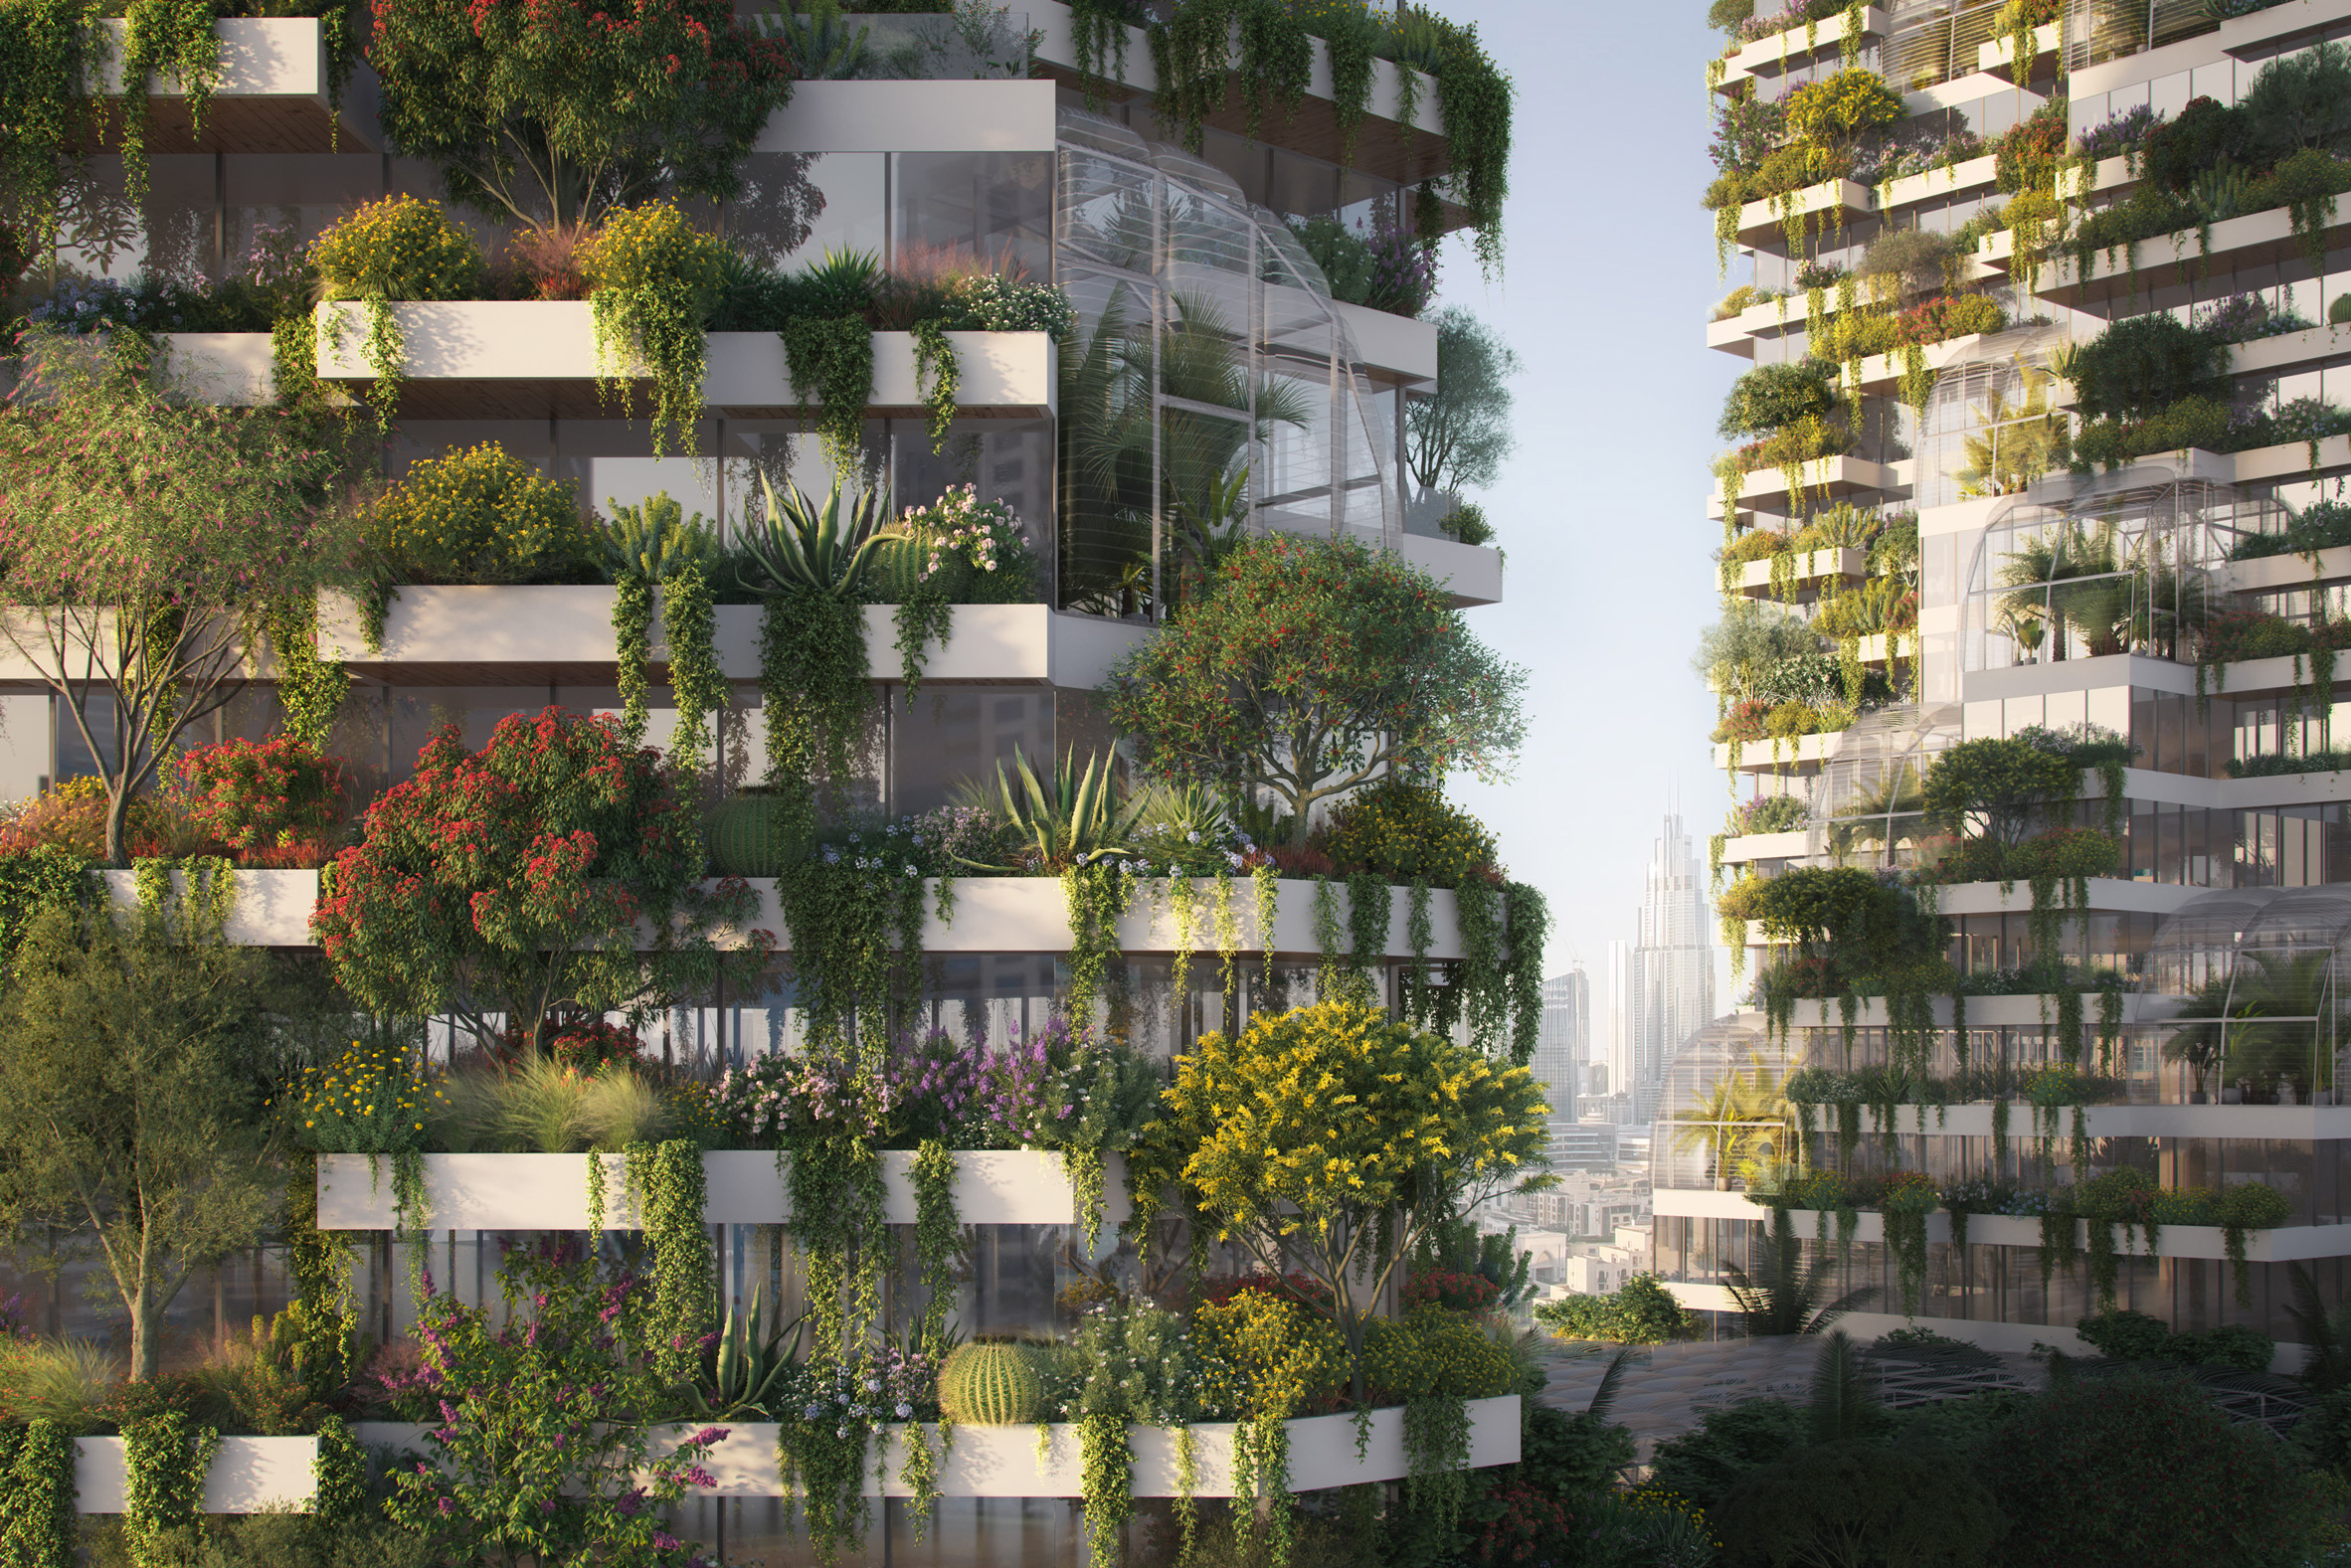 Facades of Vertical Forests in Dubai